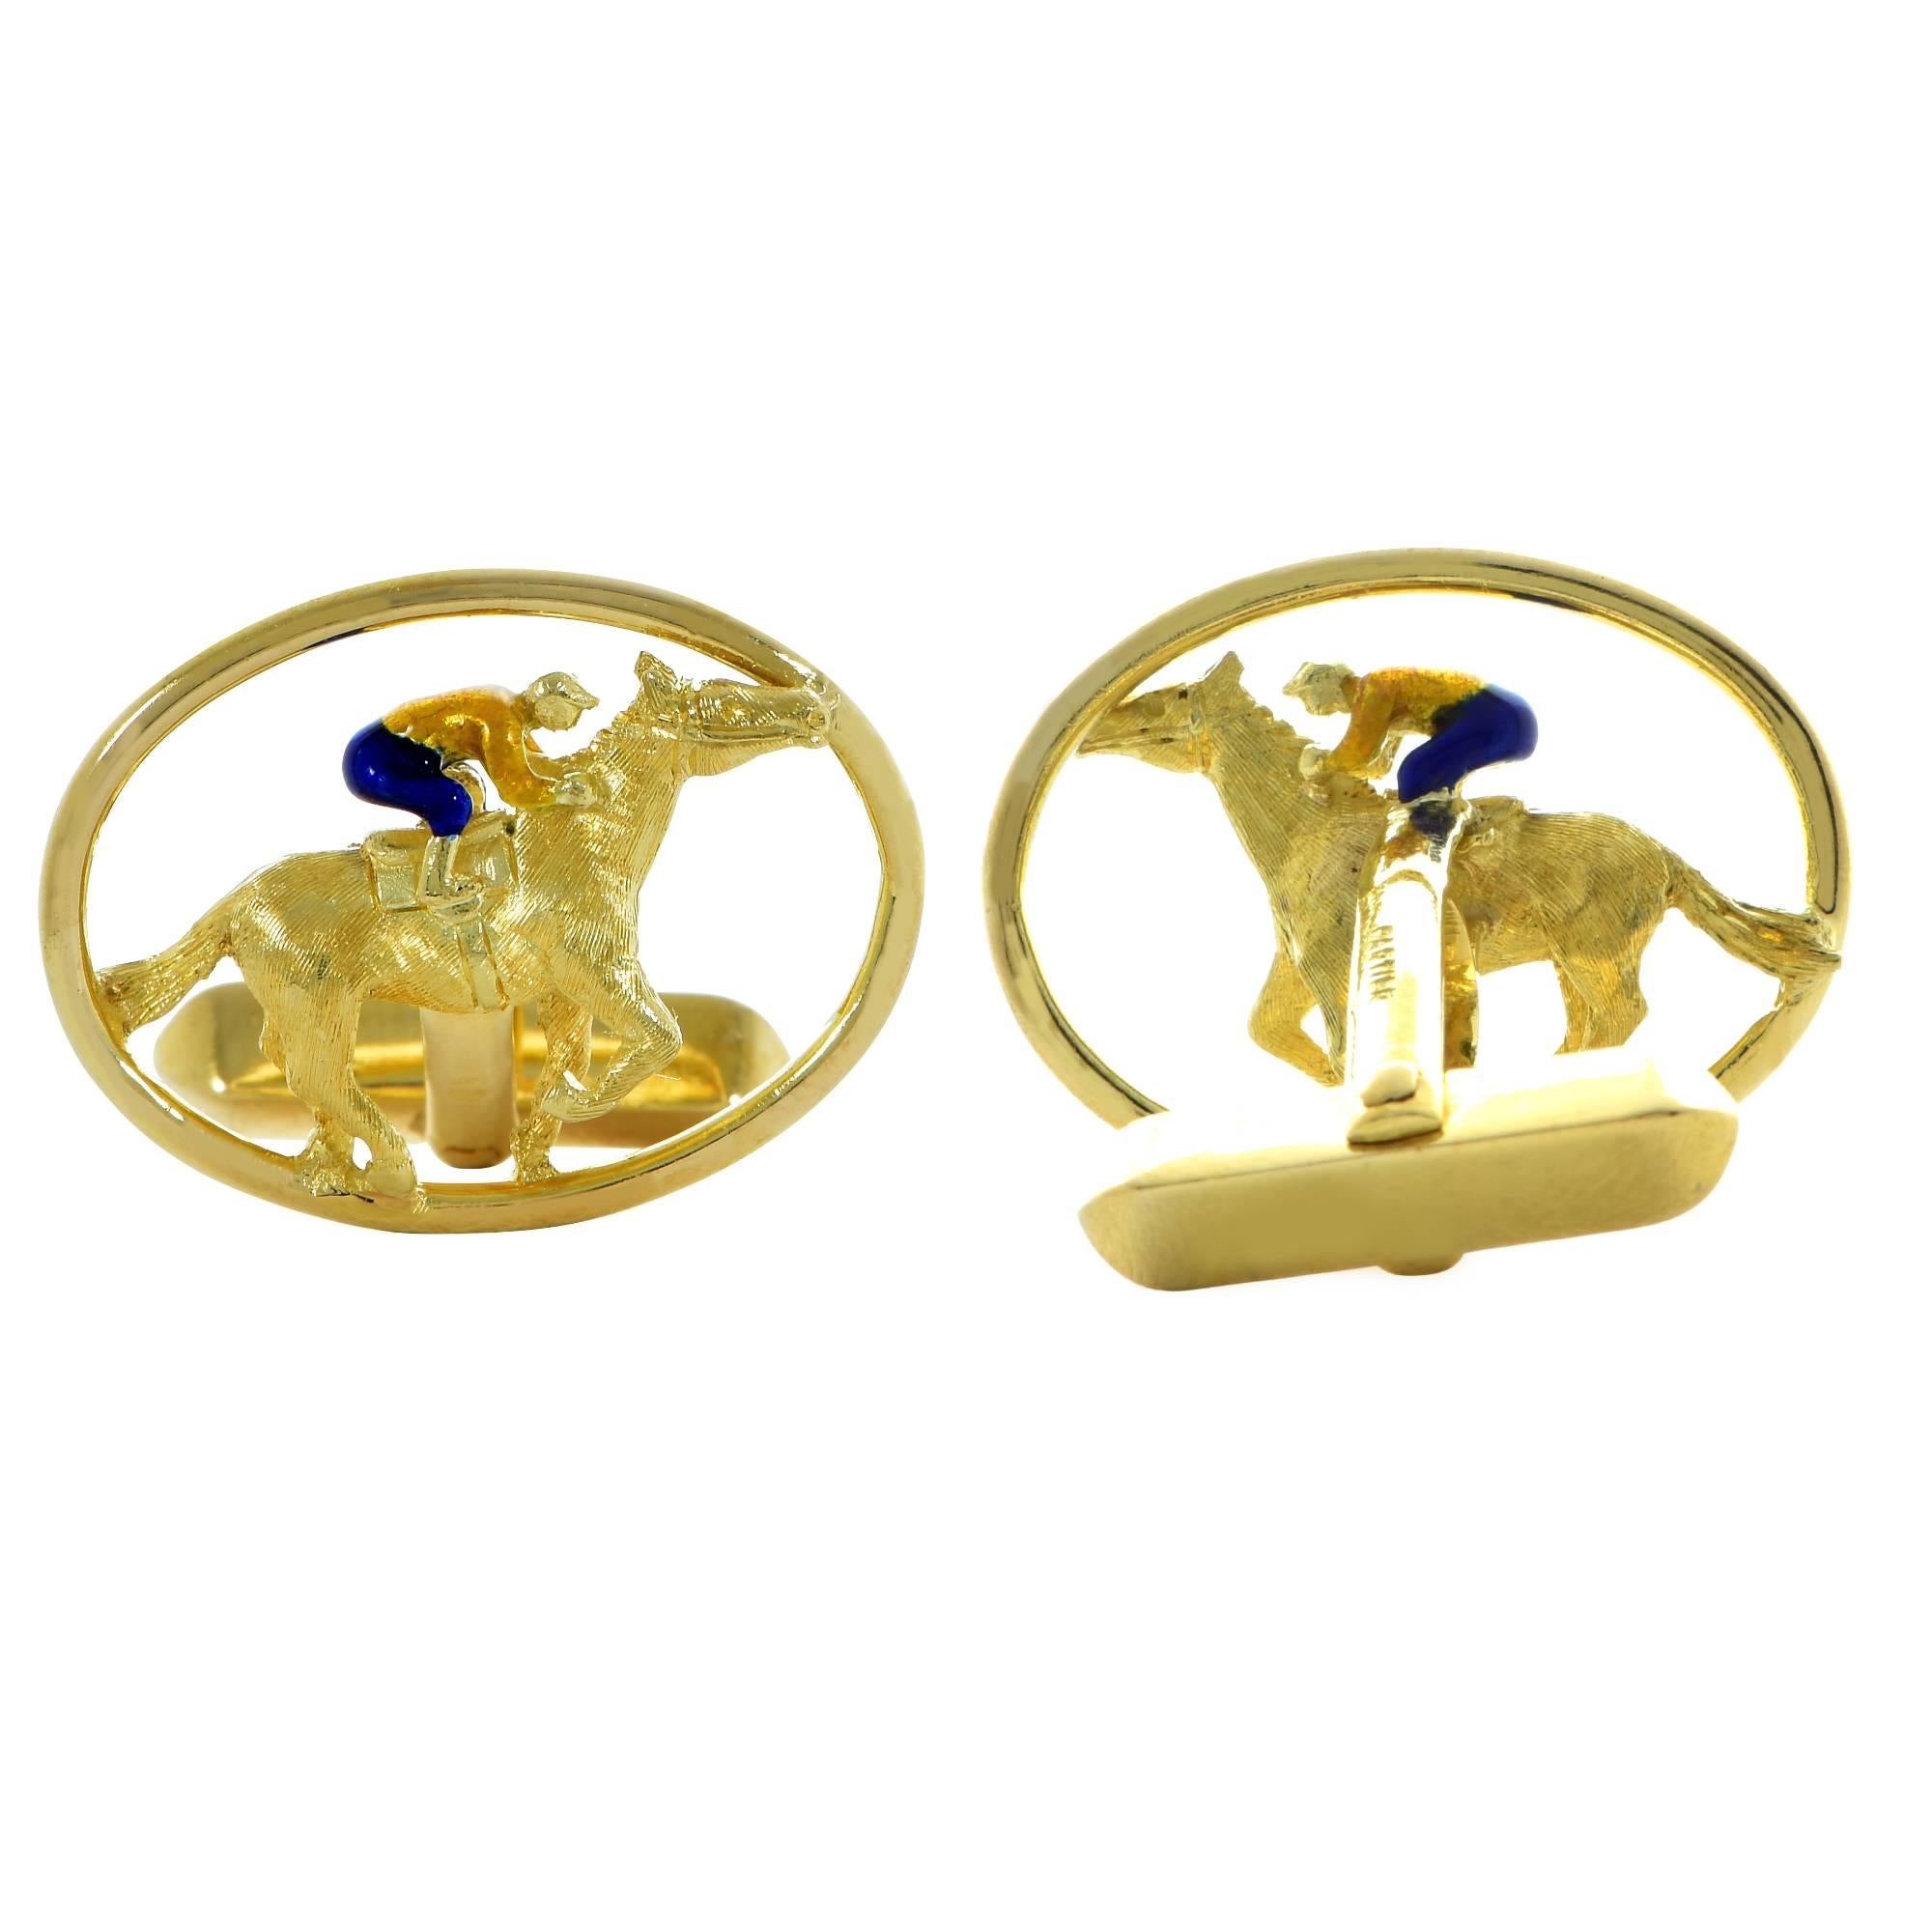 Unique 18k yellow gold men's cuff links stamped Cartier featuring a jockey adorned with blue and yellow enamel riding a galloping stallion. These cuff links measure 23.7mm x 18.3mm and weighs 14 grams

Our pieces are all accompanied by an appraisal